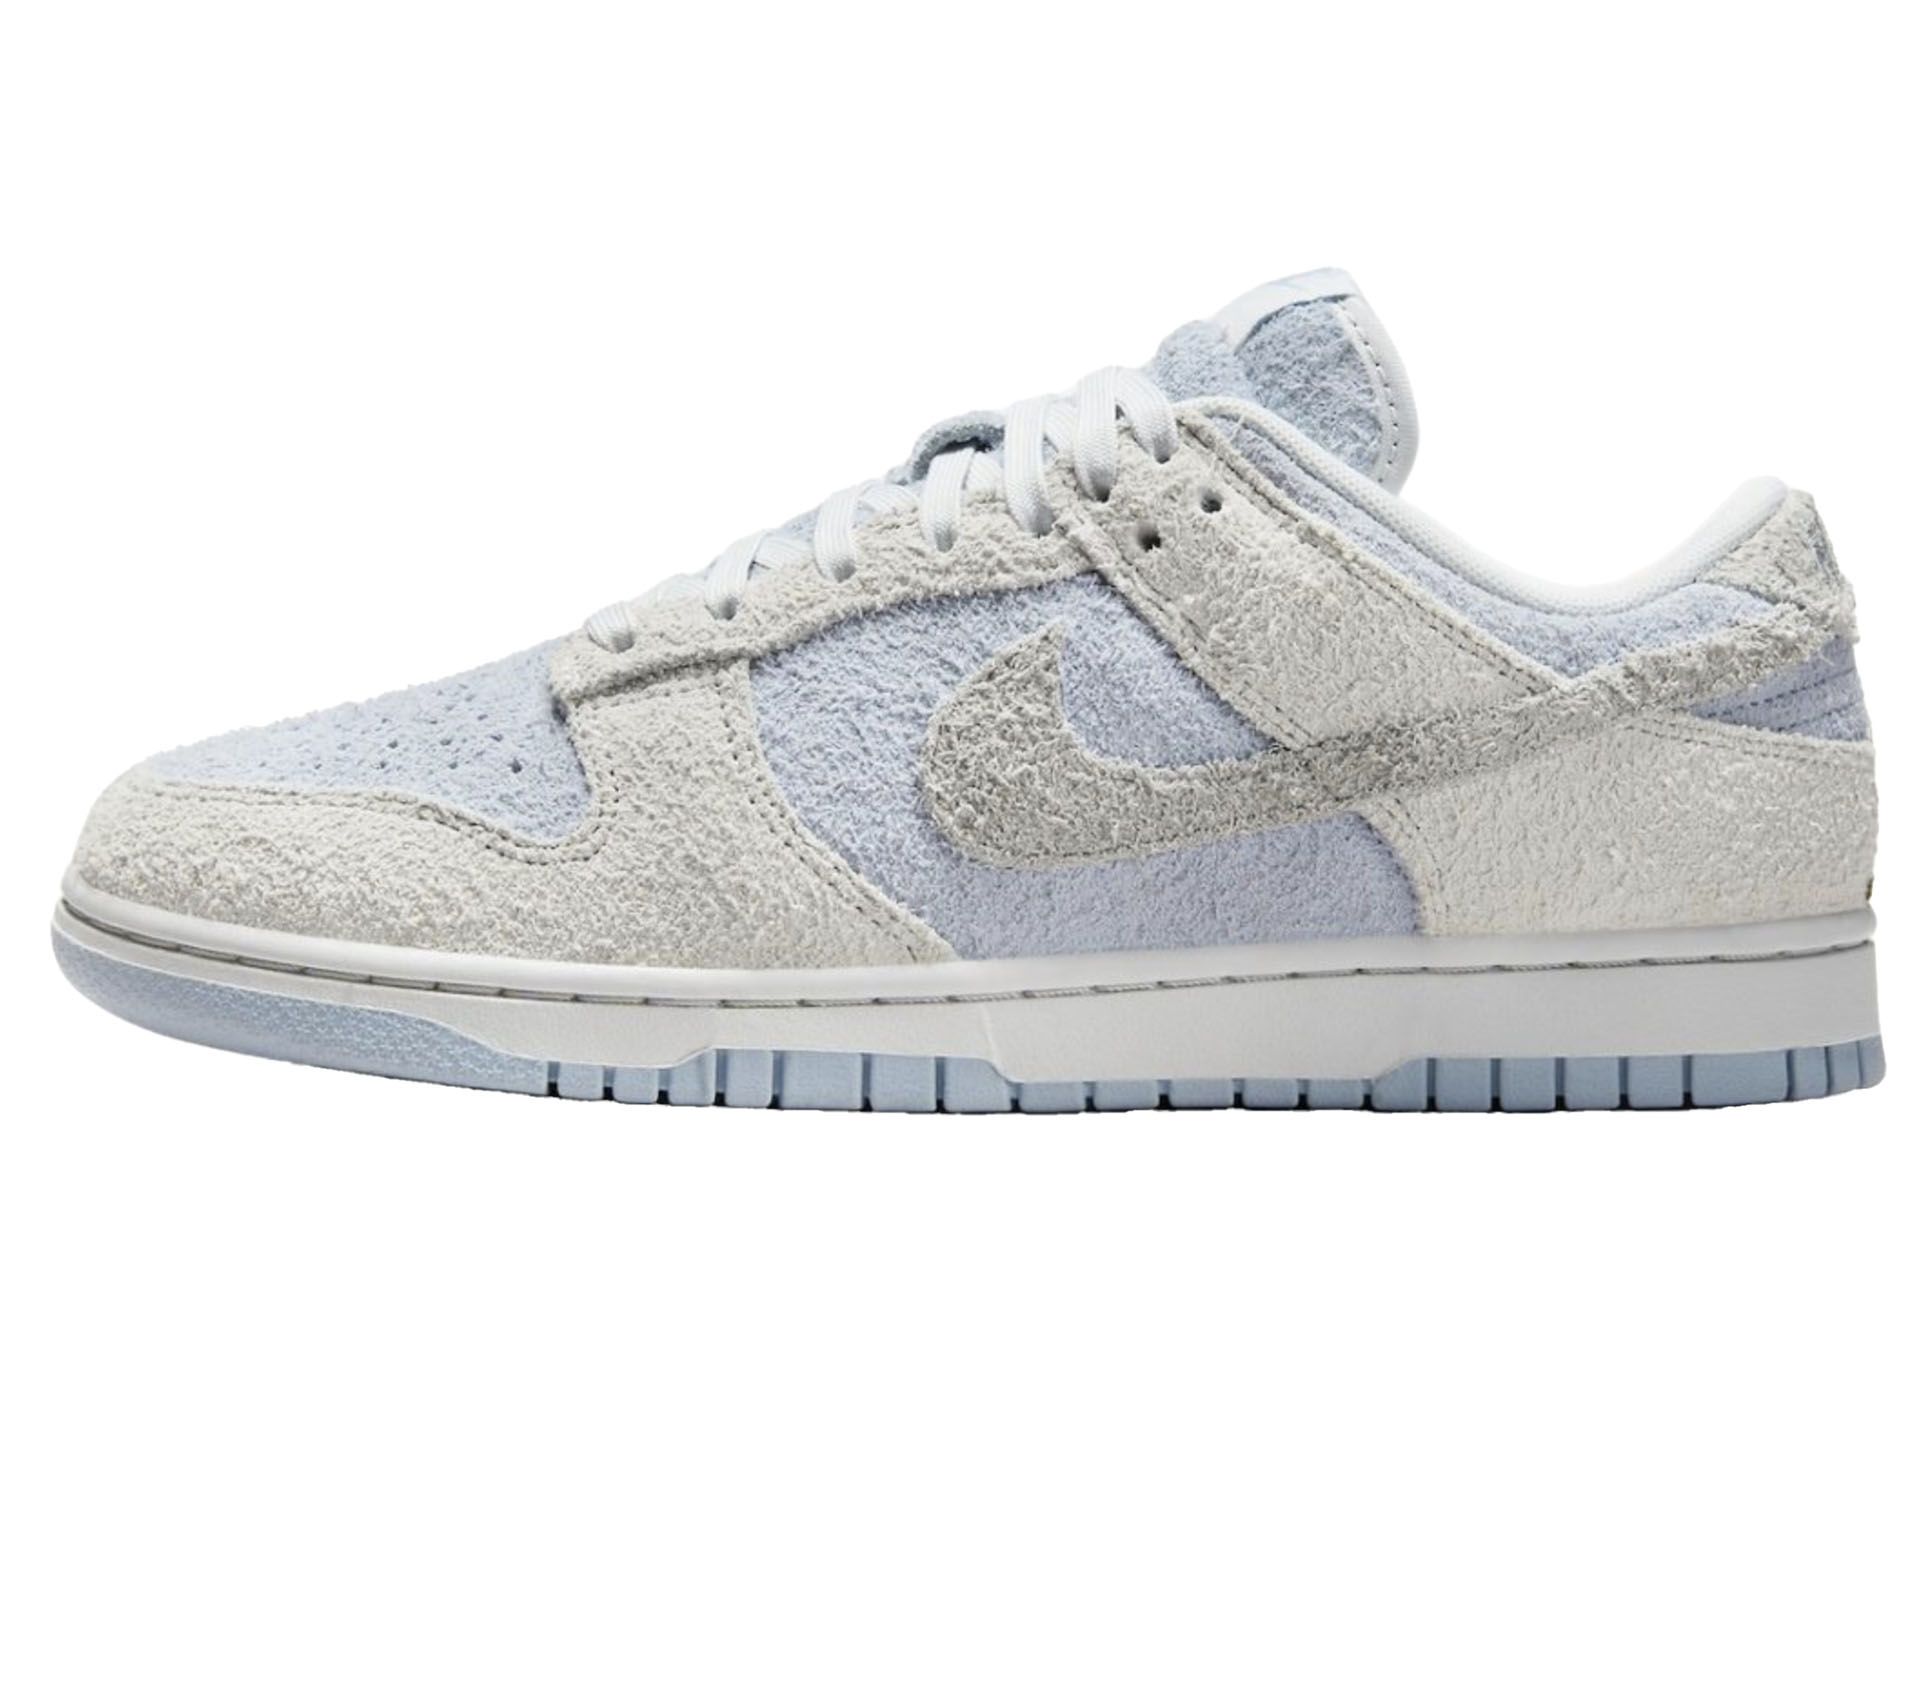 Image #1 of W DUNK LOW